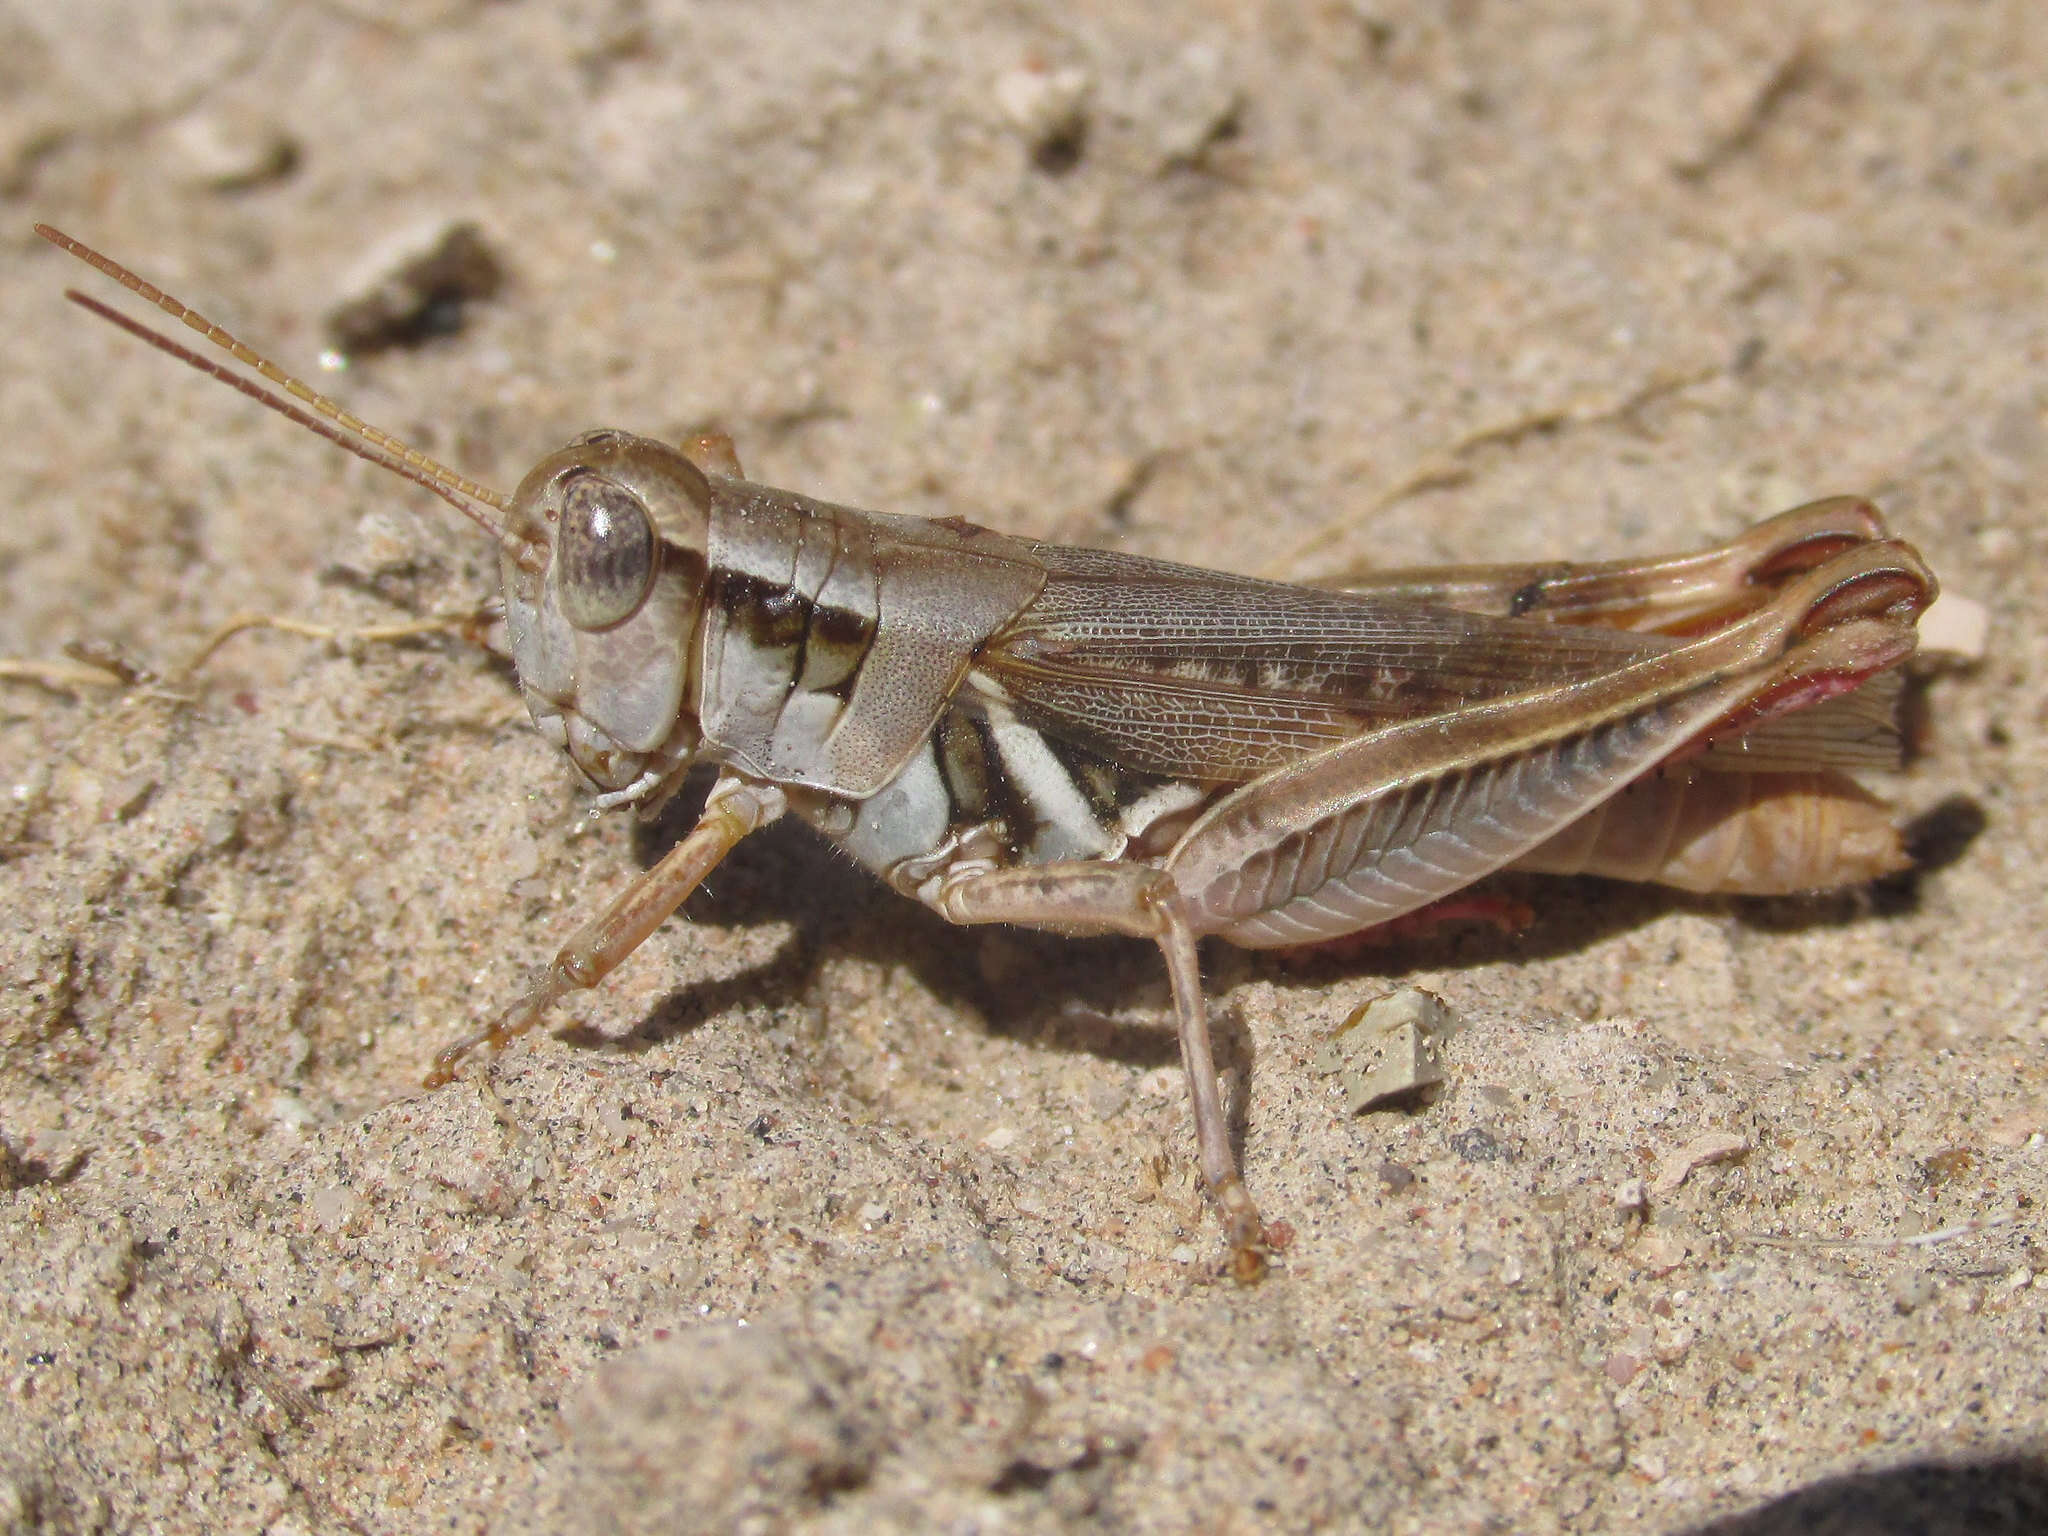 Image of Narrow-winged Spur-throat Grasshopper